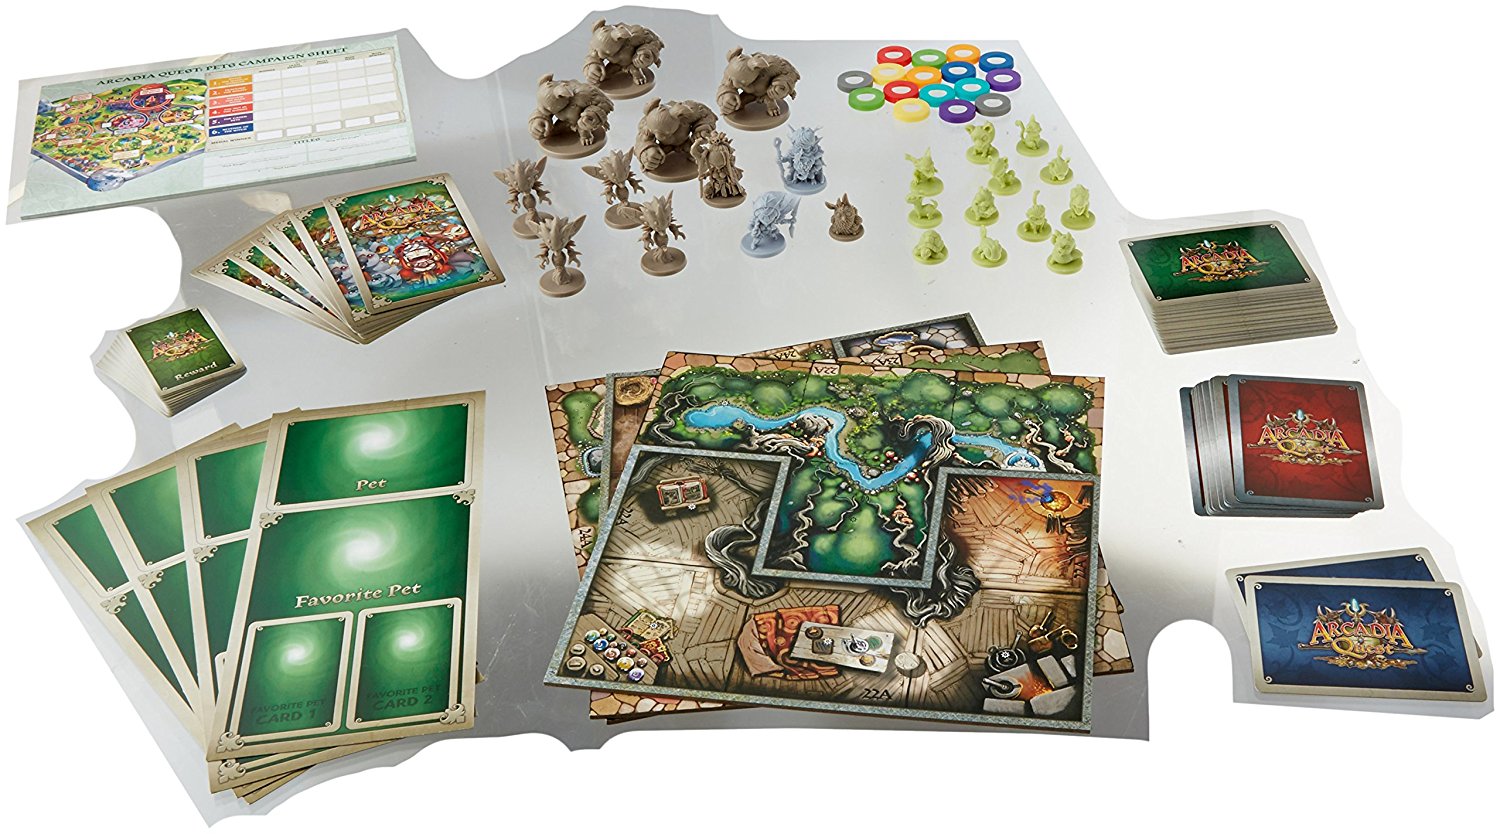 Today only: Save up to 50% on board games